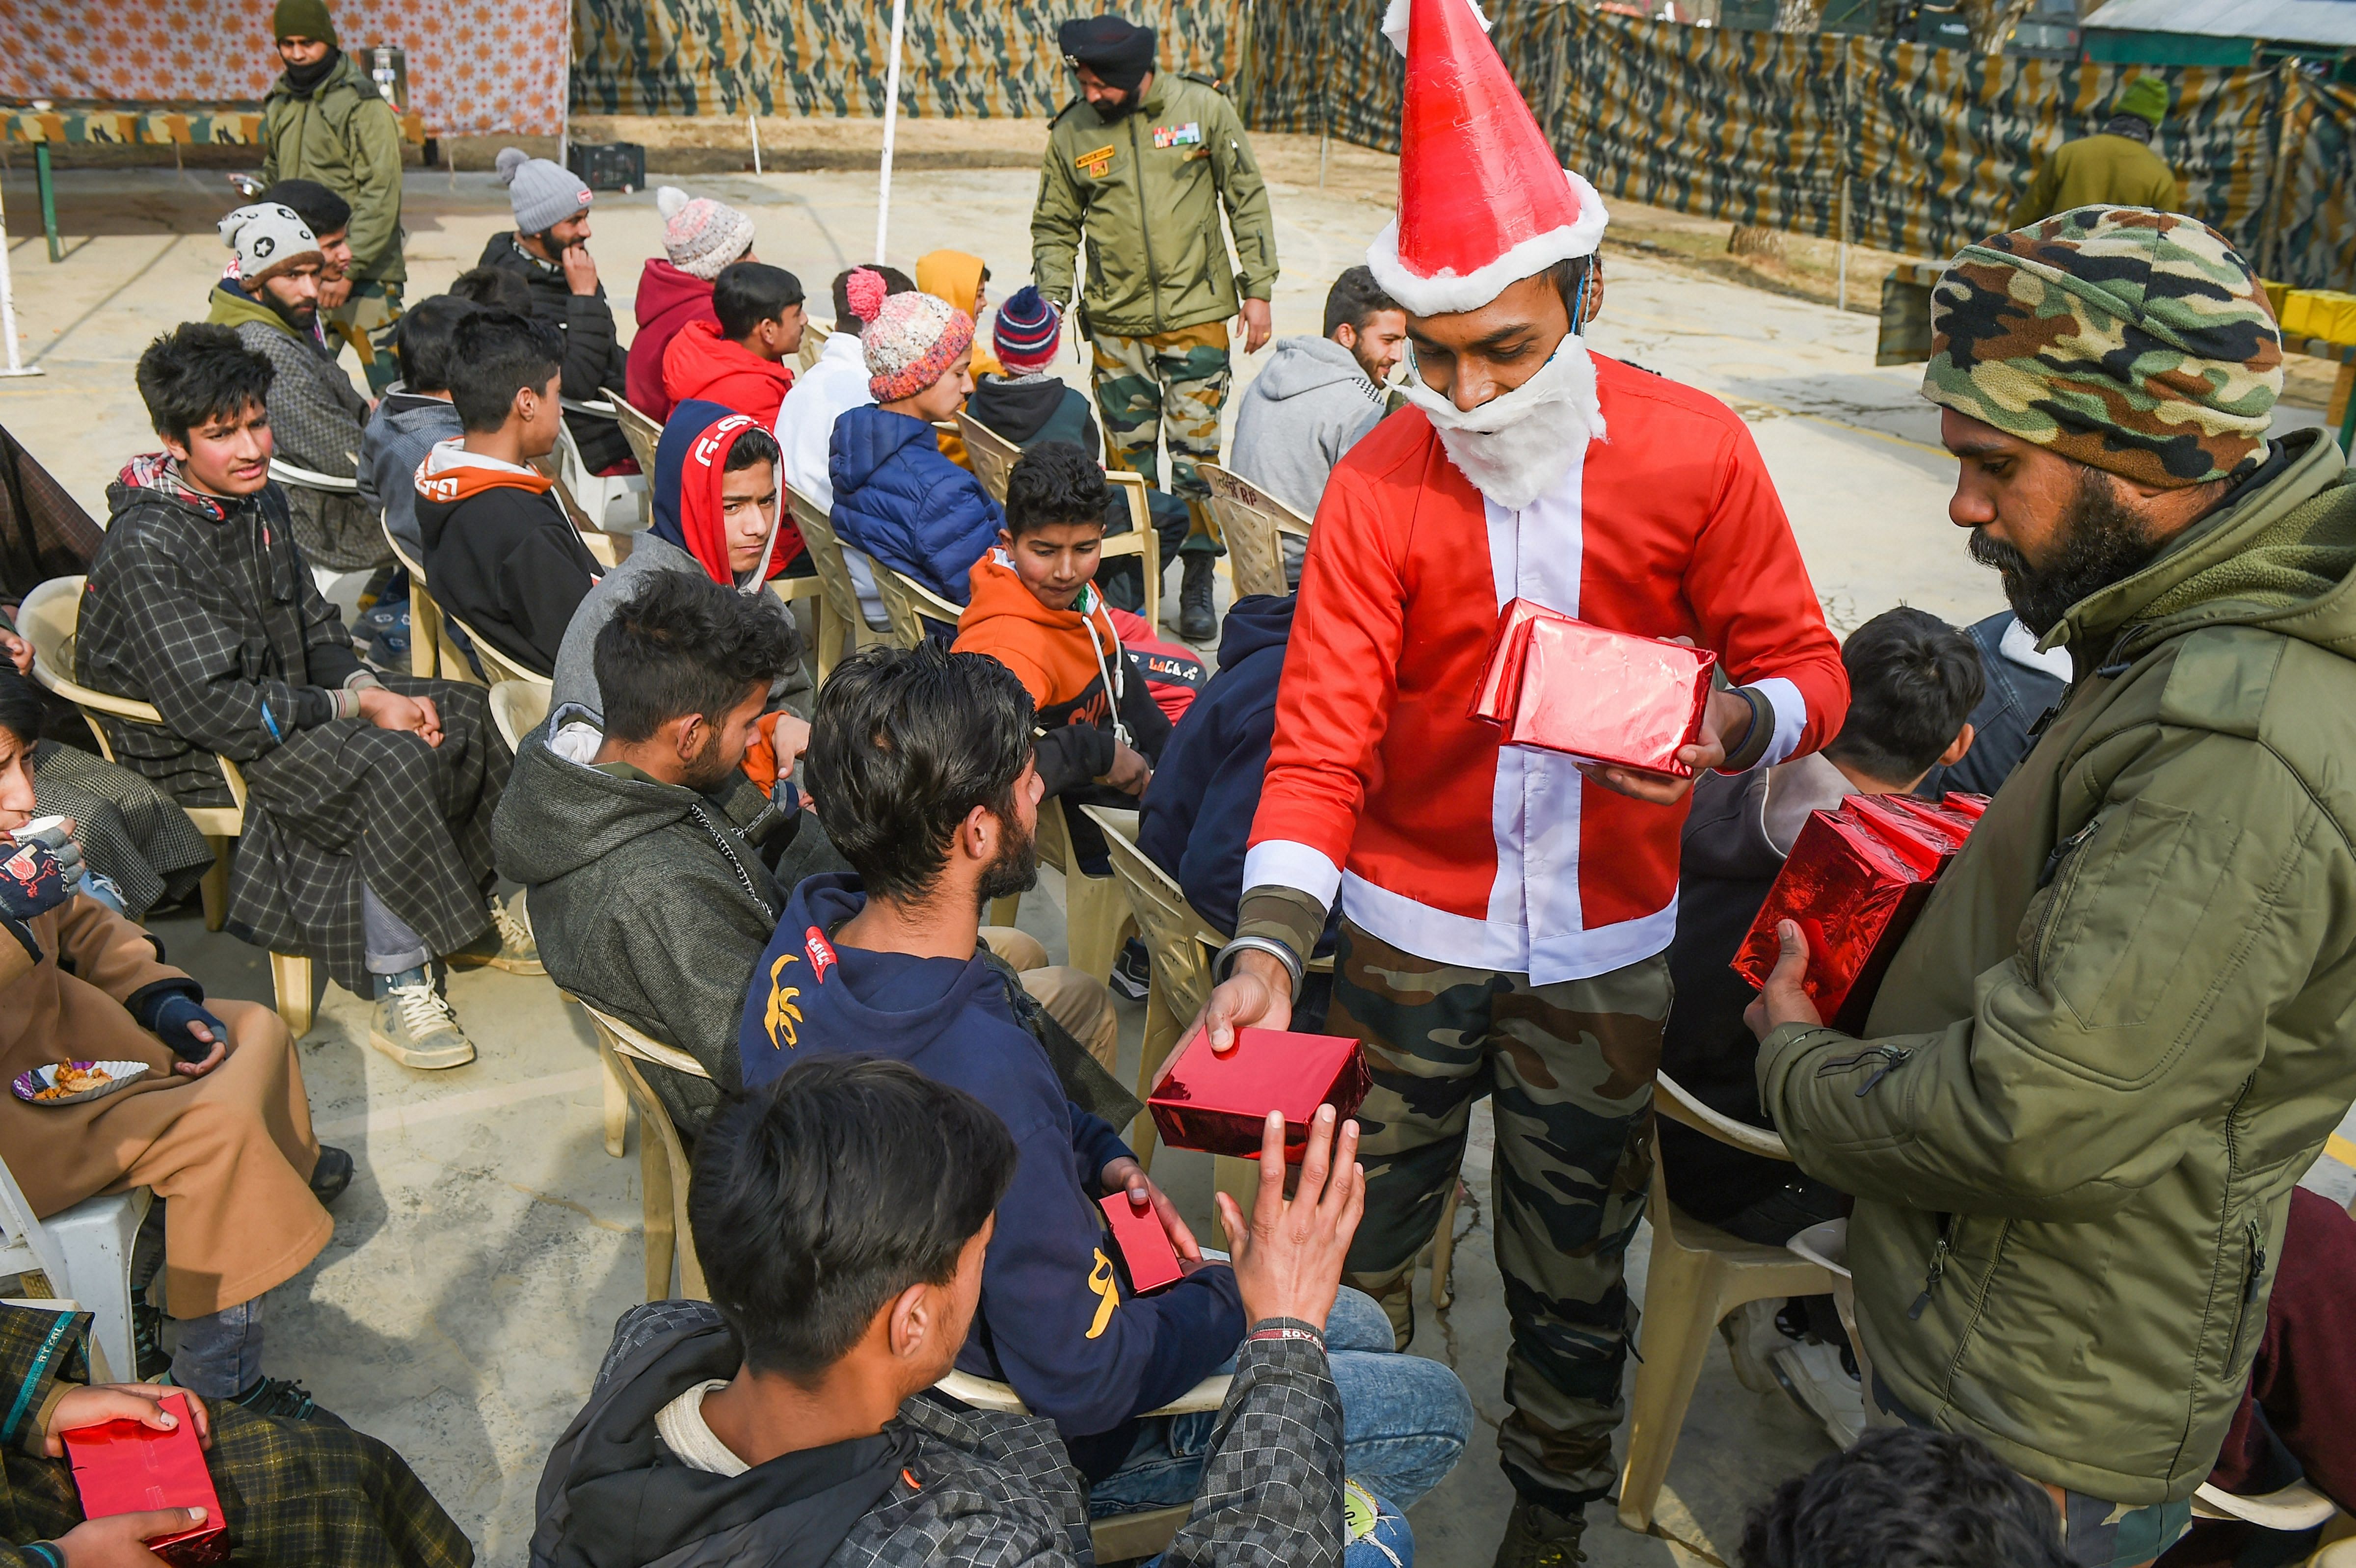 An army personnel dressed as Santa Claus distributes sweets among local youth during Christmas celebrations at Army Camp Larkipora in Anantnag district of south Kashmir, Friday, Dec. 25, 2020. Credit: PTI Photo